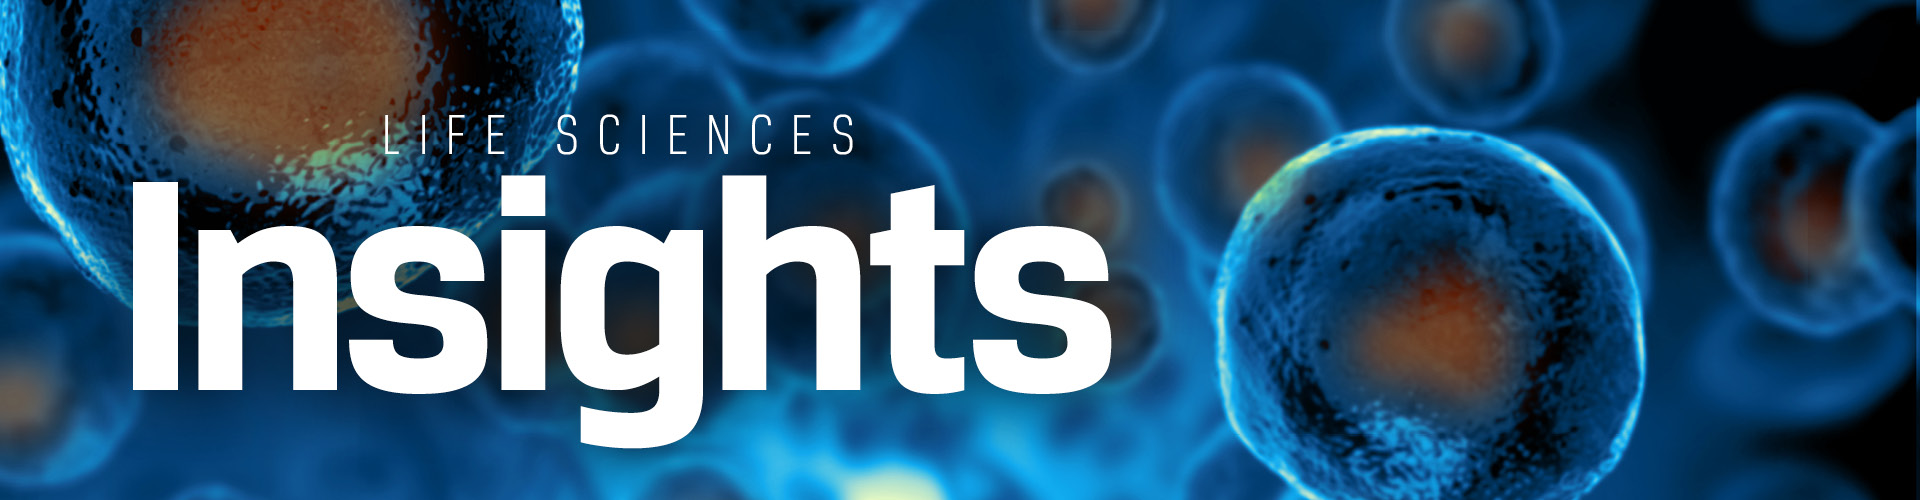 Life Sciences Insights